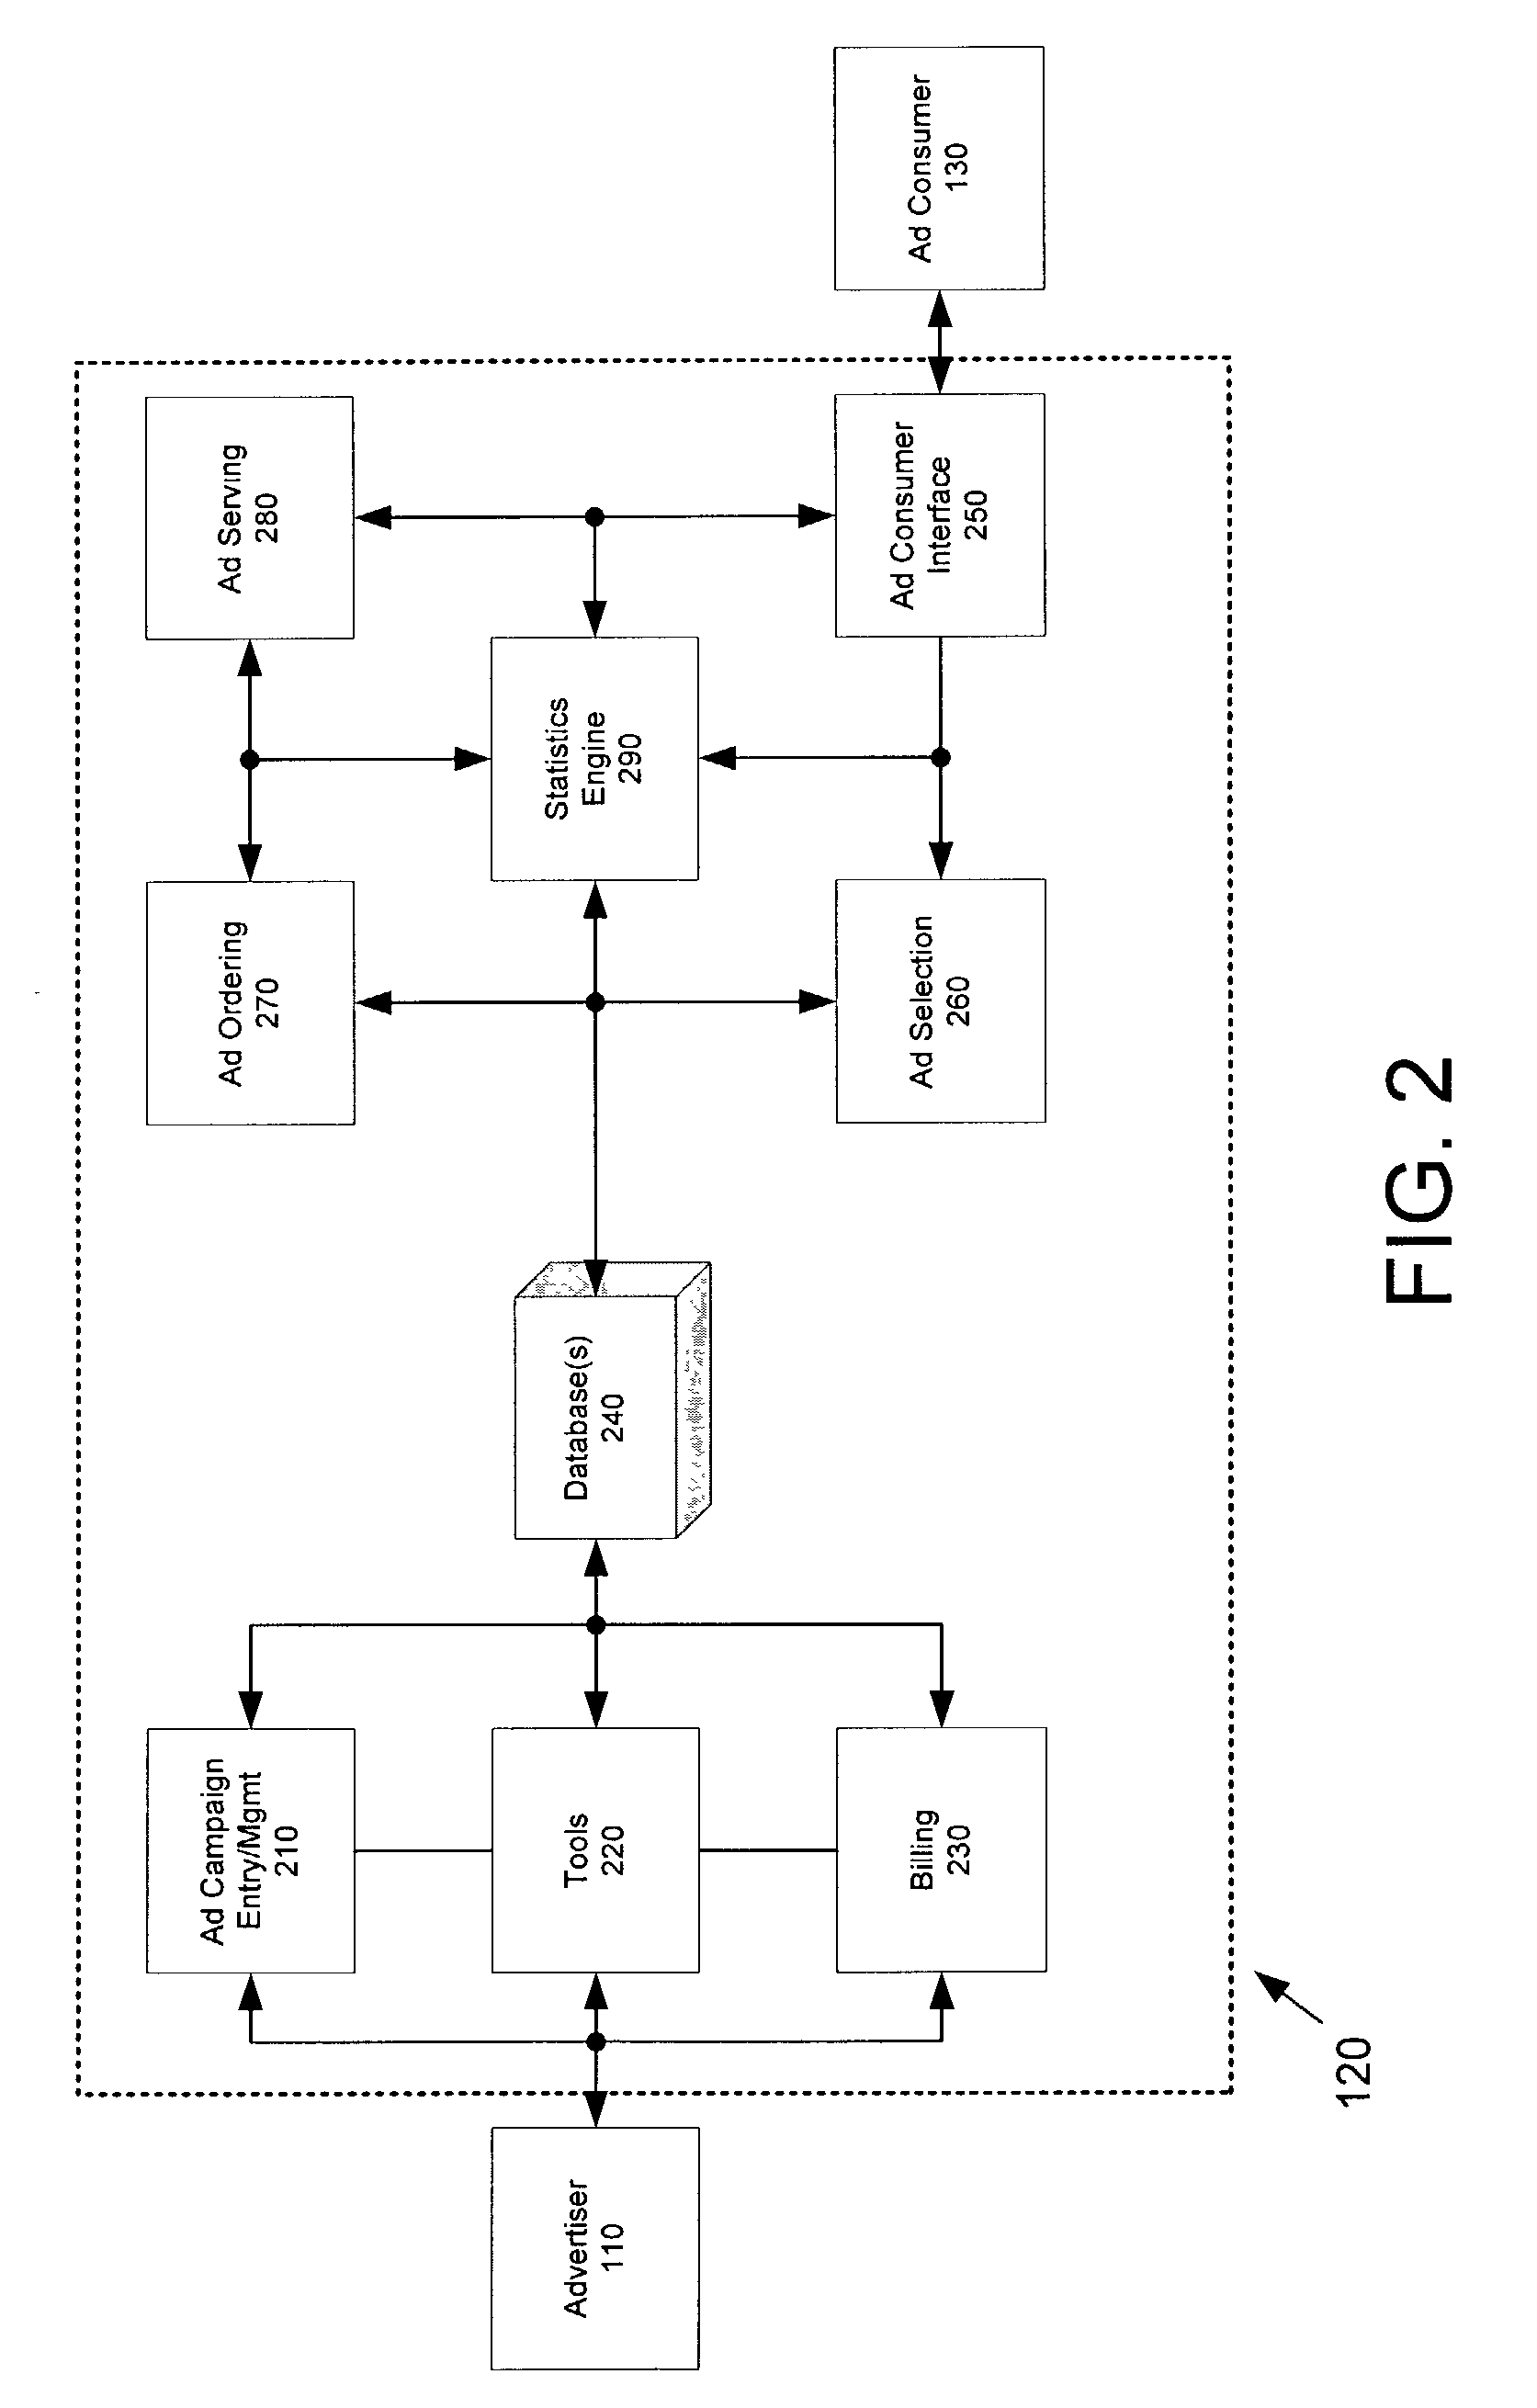 Methods and apparatus for serving relevant advertisements